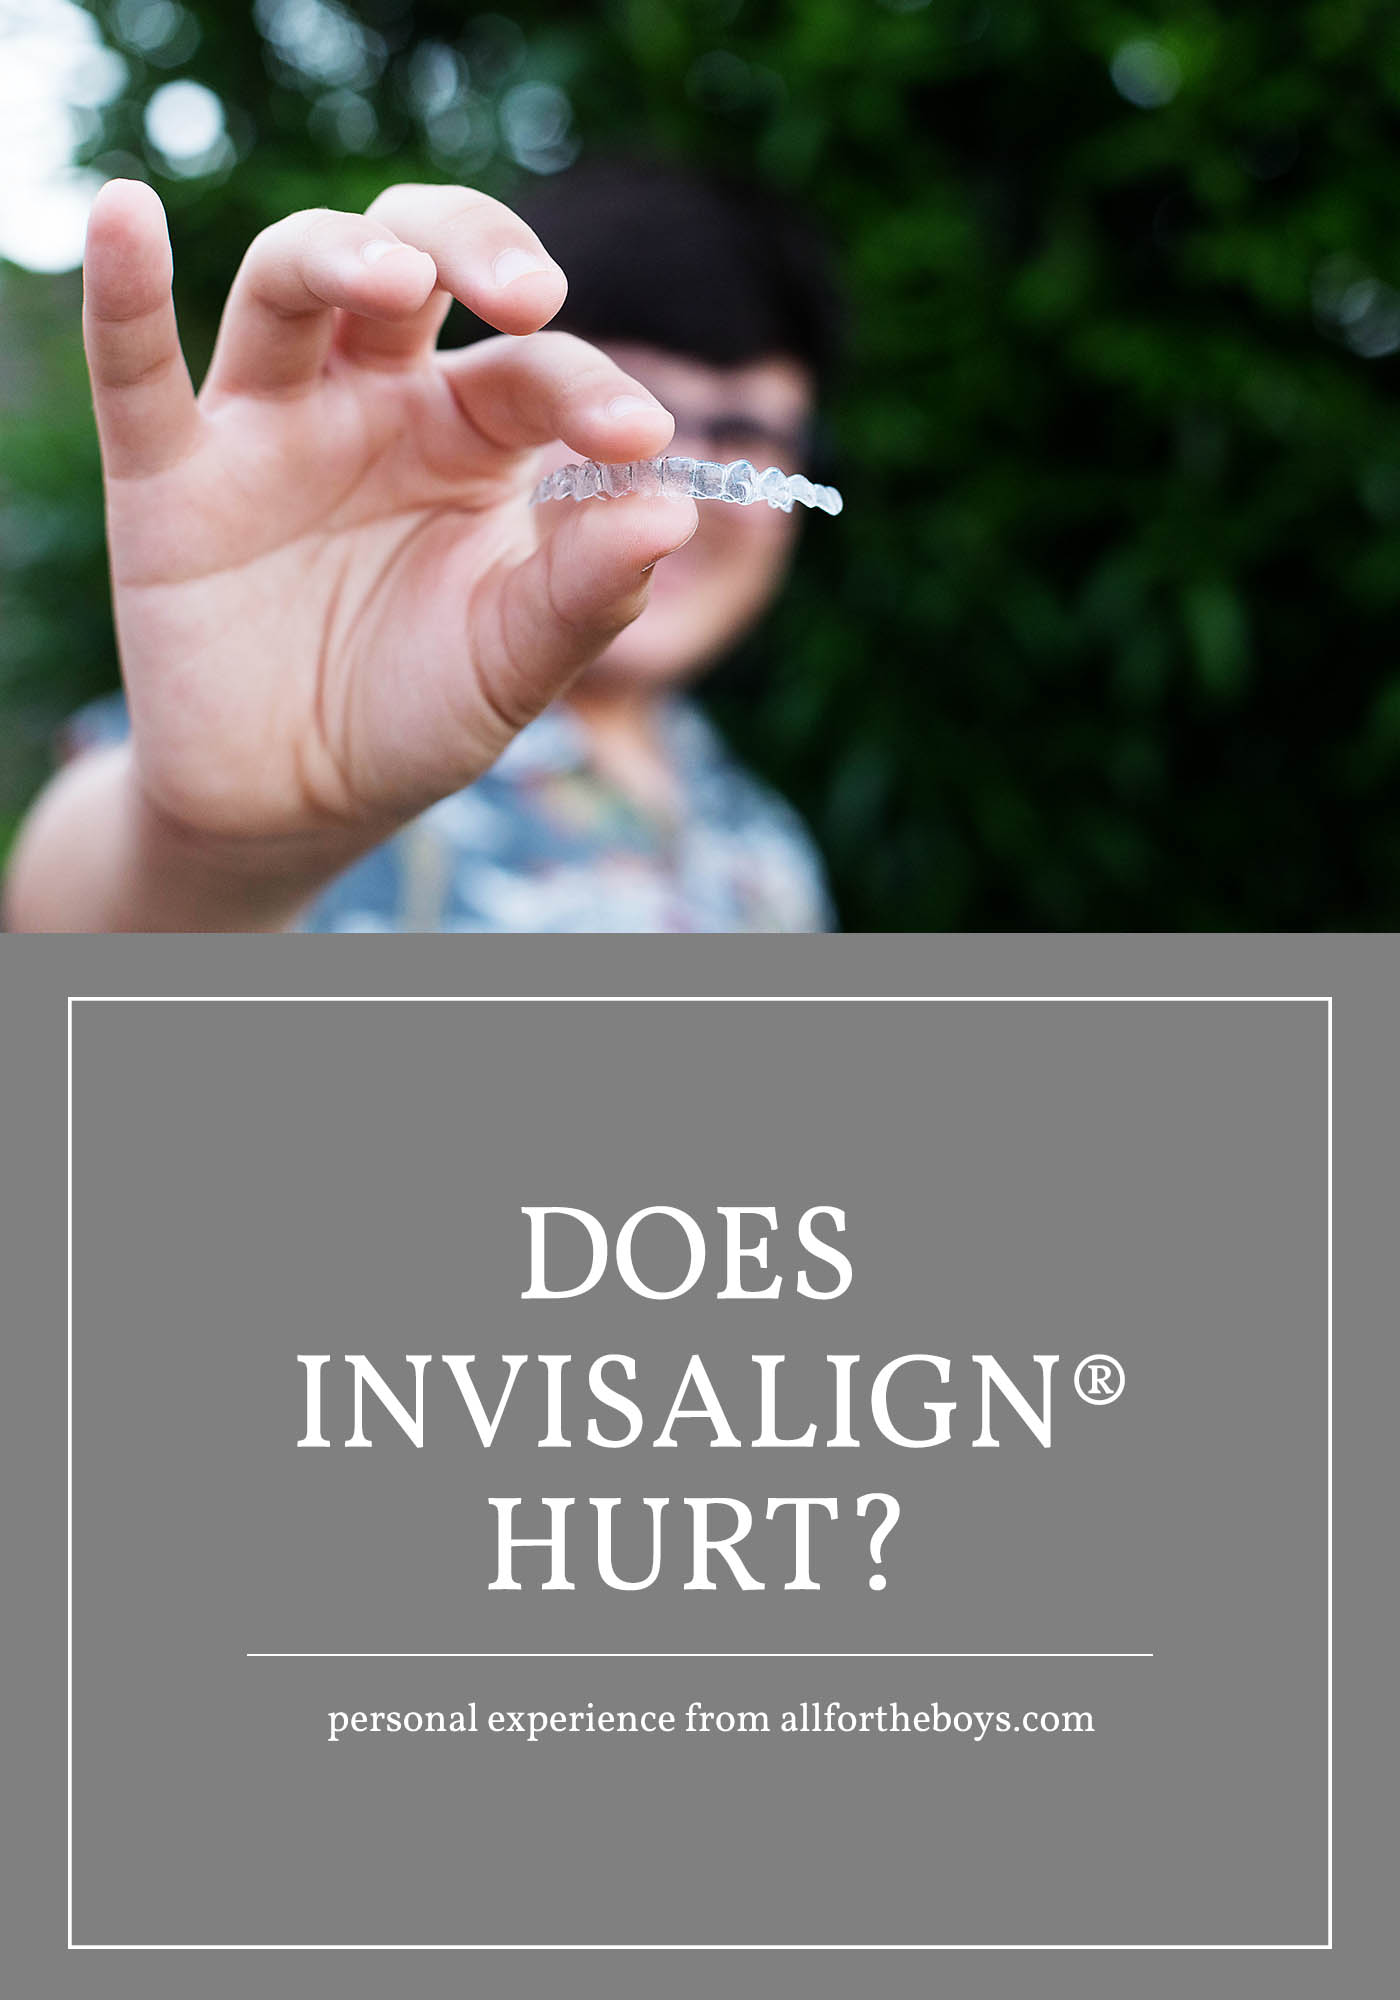 Does Invisalign hurt? A personal experience from allfortheboys.com